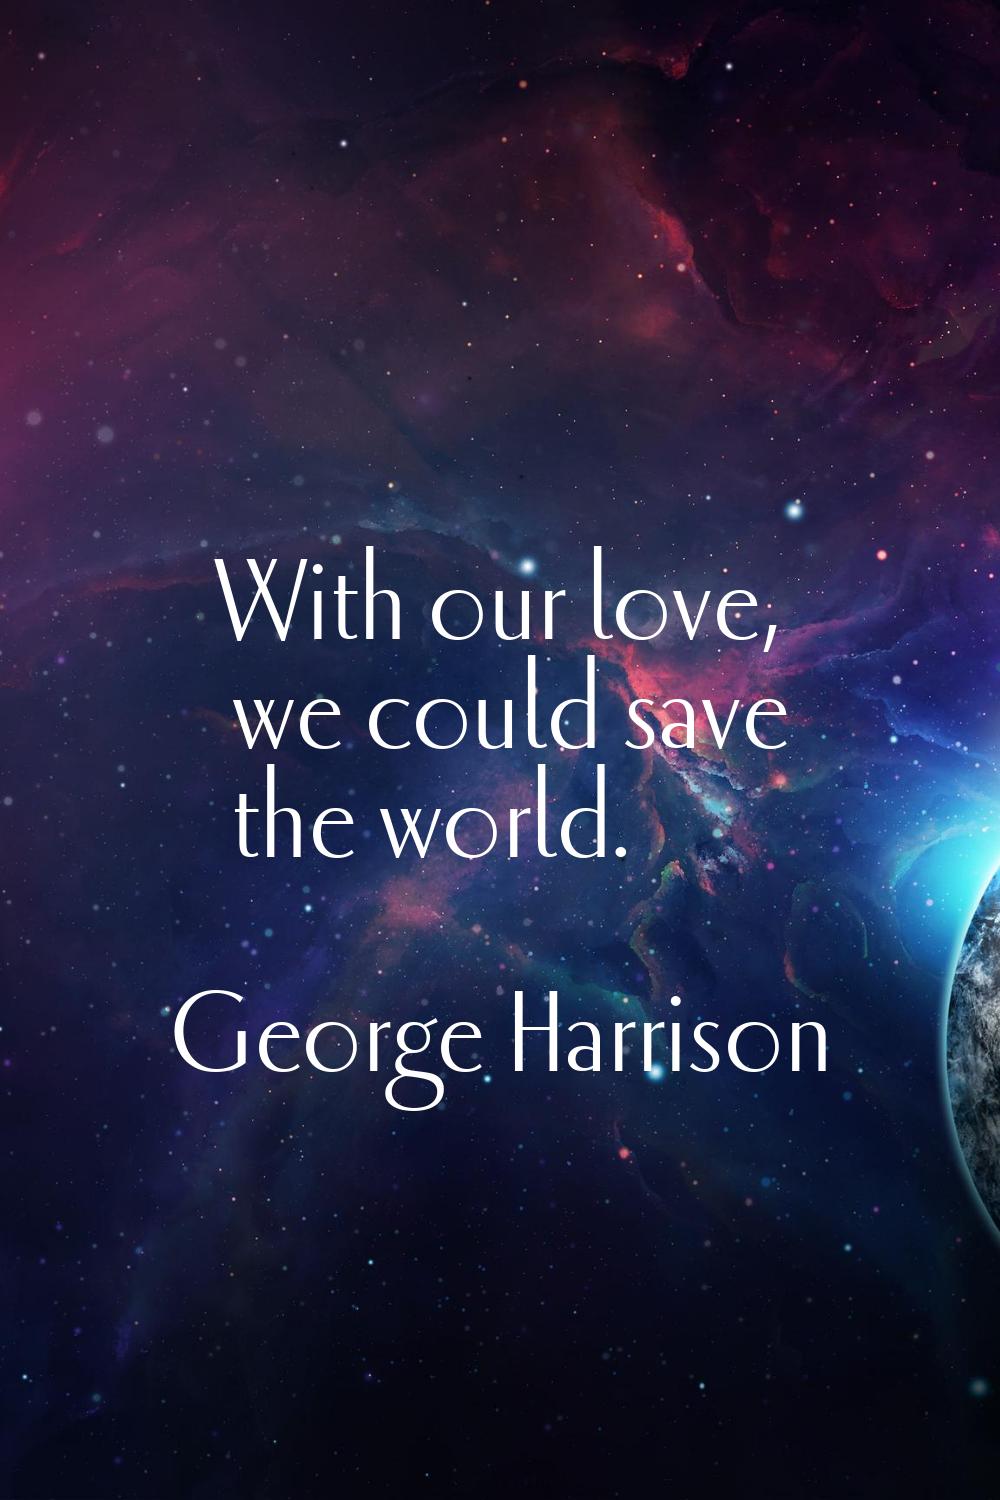 With our love, we could save the world.